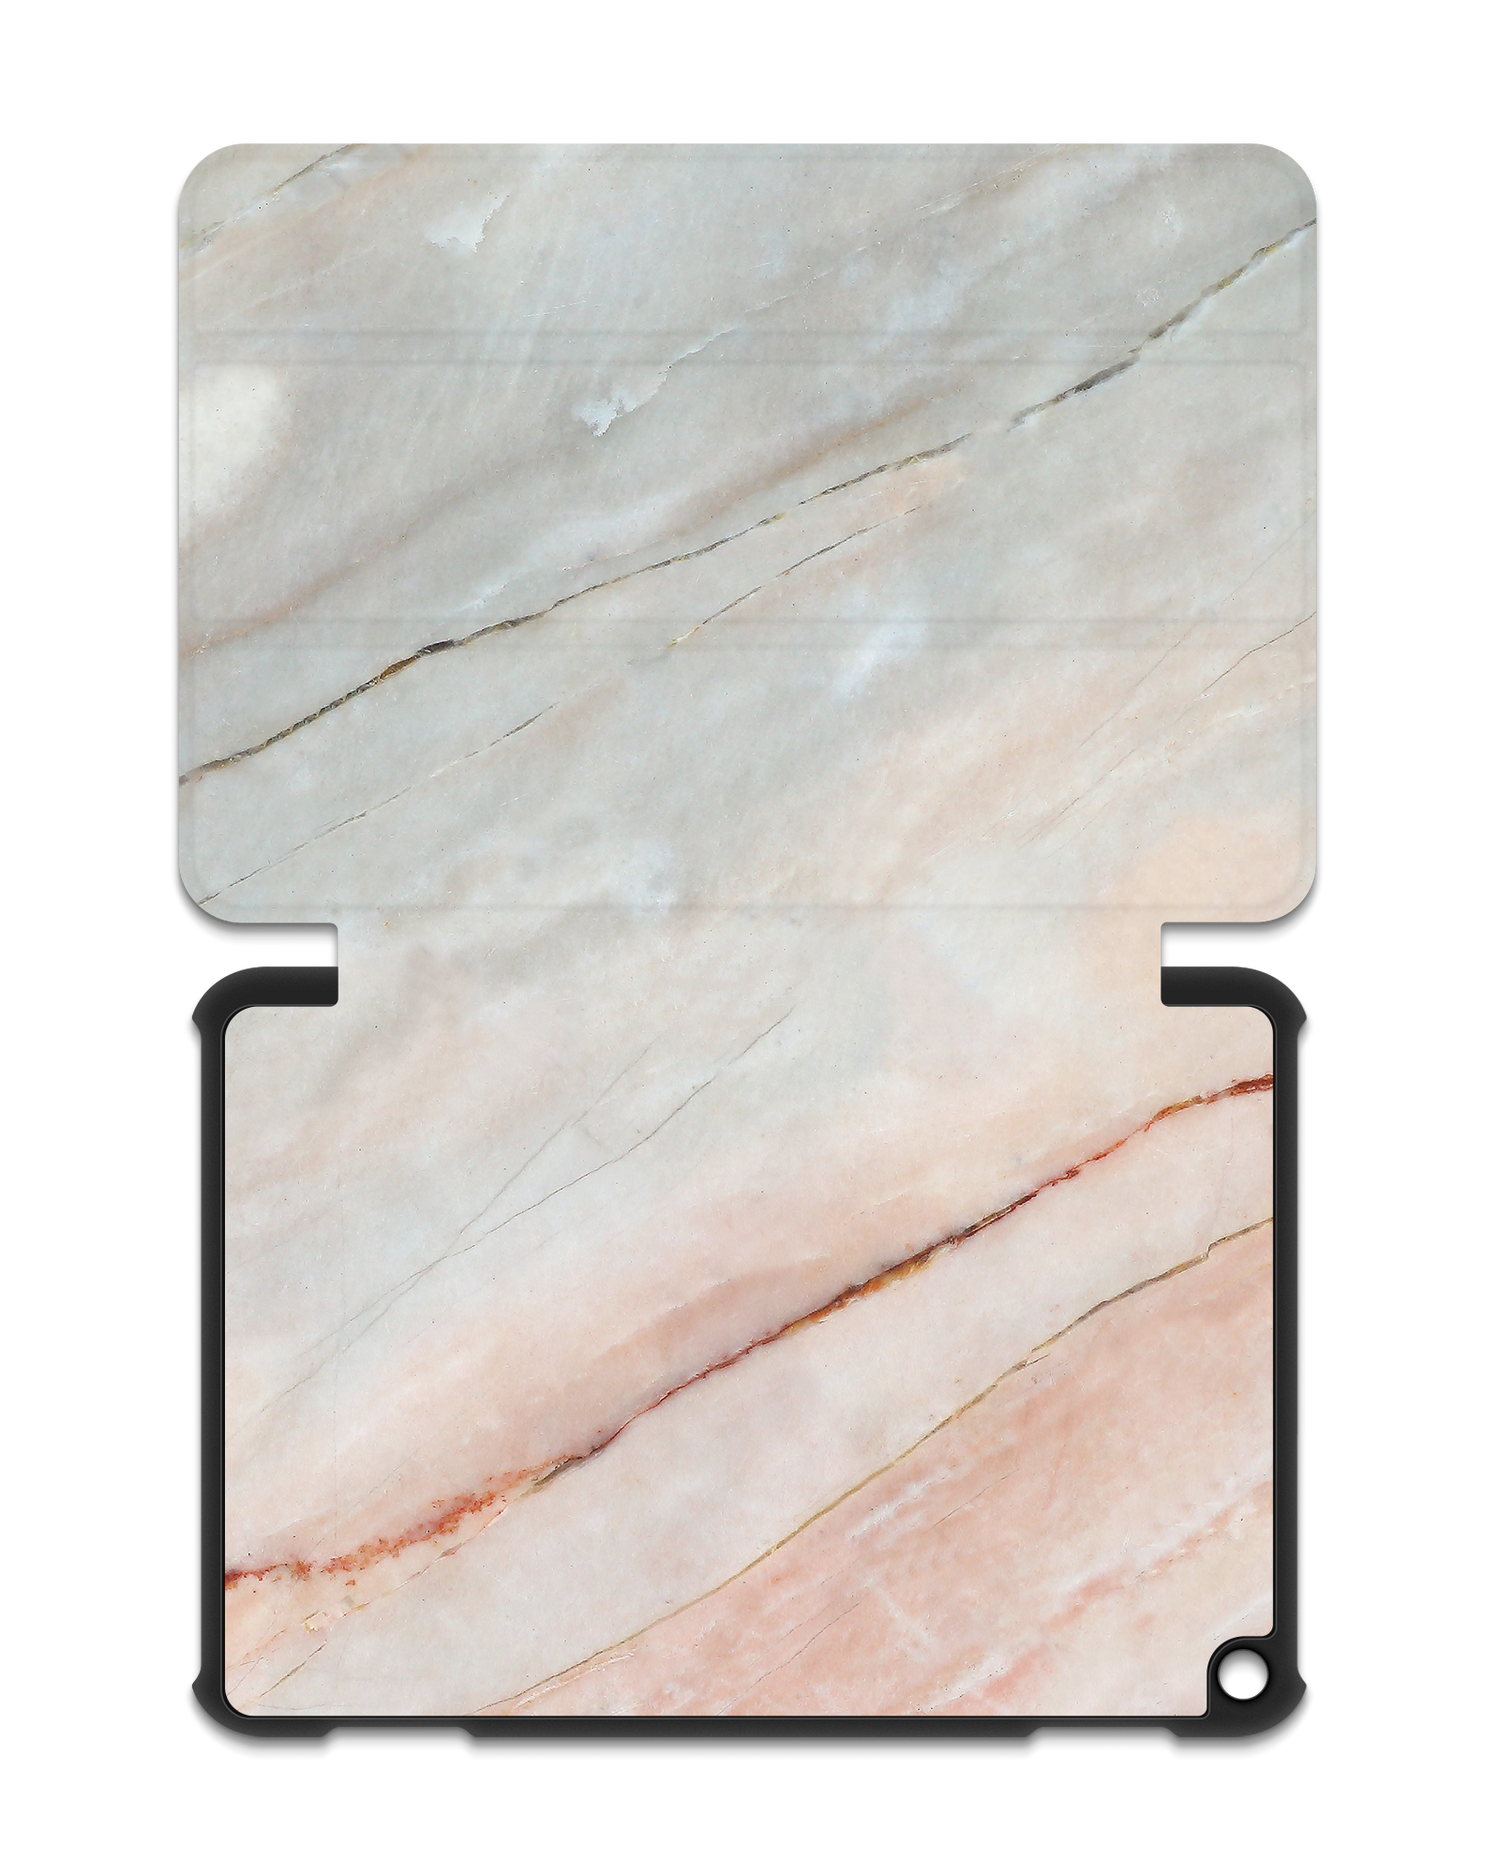 Mother of Pearl Marble Tablet Smart Case für Amazon Fire HD 8 (2022), Amazon Fire HD 8 Plus (2022), Amazon Fire HD 8 (2020), Amazon Fire HD 8 Plus (2020): Aufgeklappt